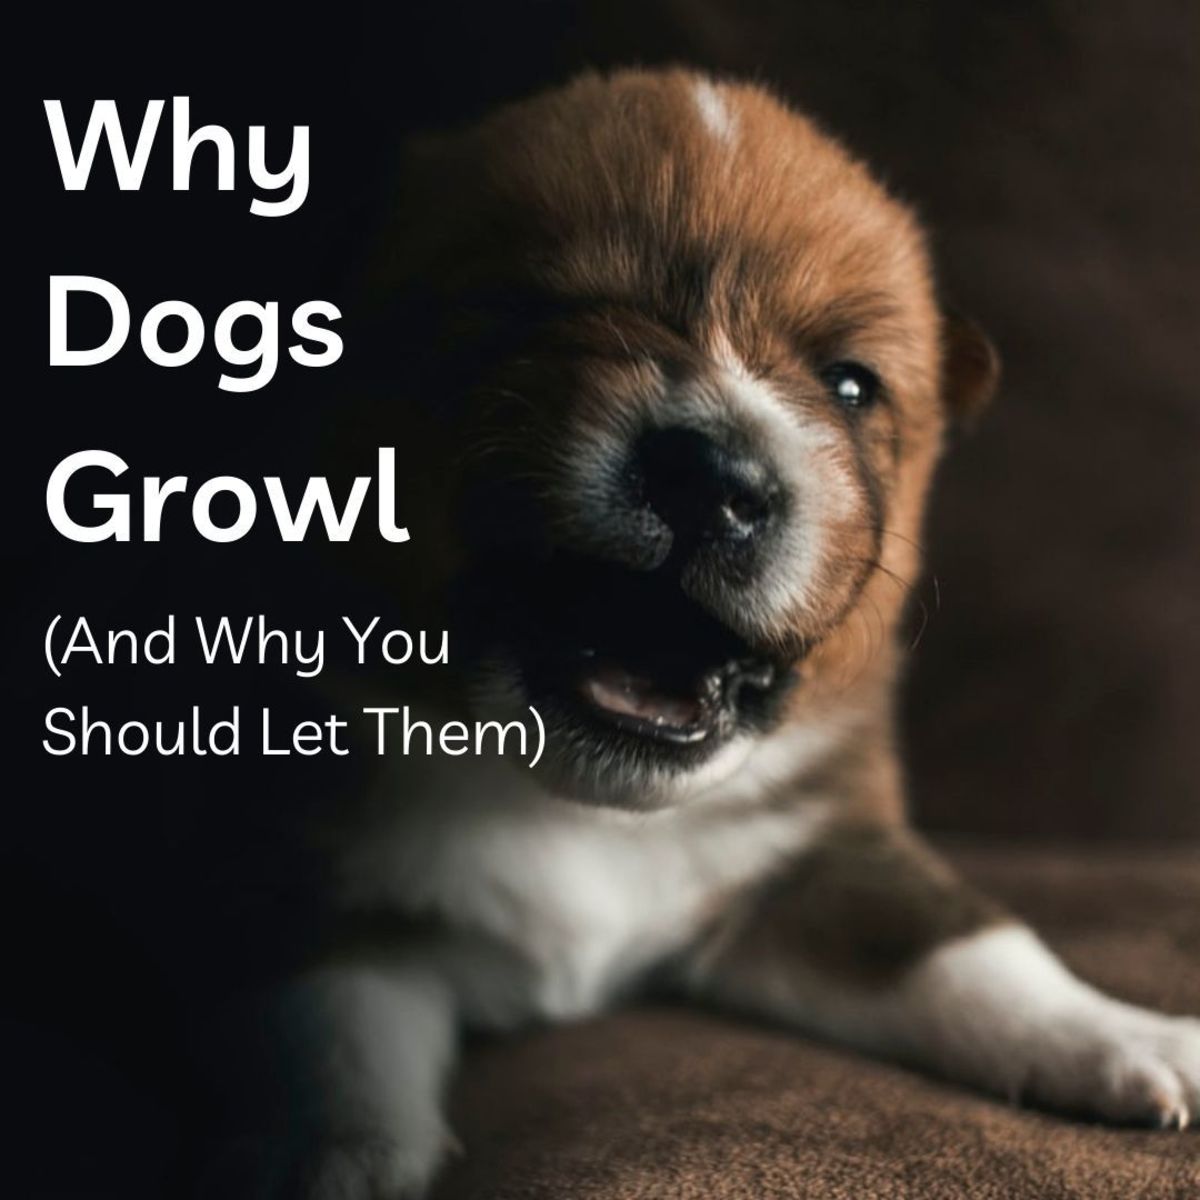  Dog owners often do not realize that reprimanding a dog for growling is like telling the dog ''Do not bother to warn you are about to bite next time, just do it.''